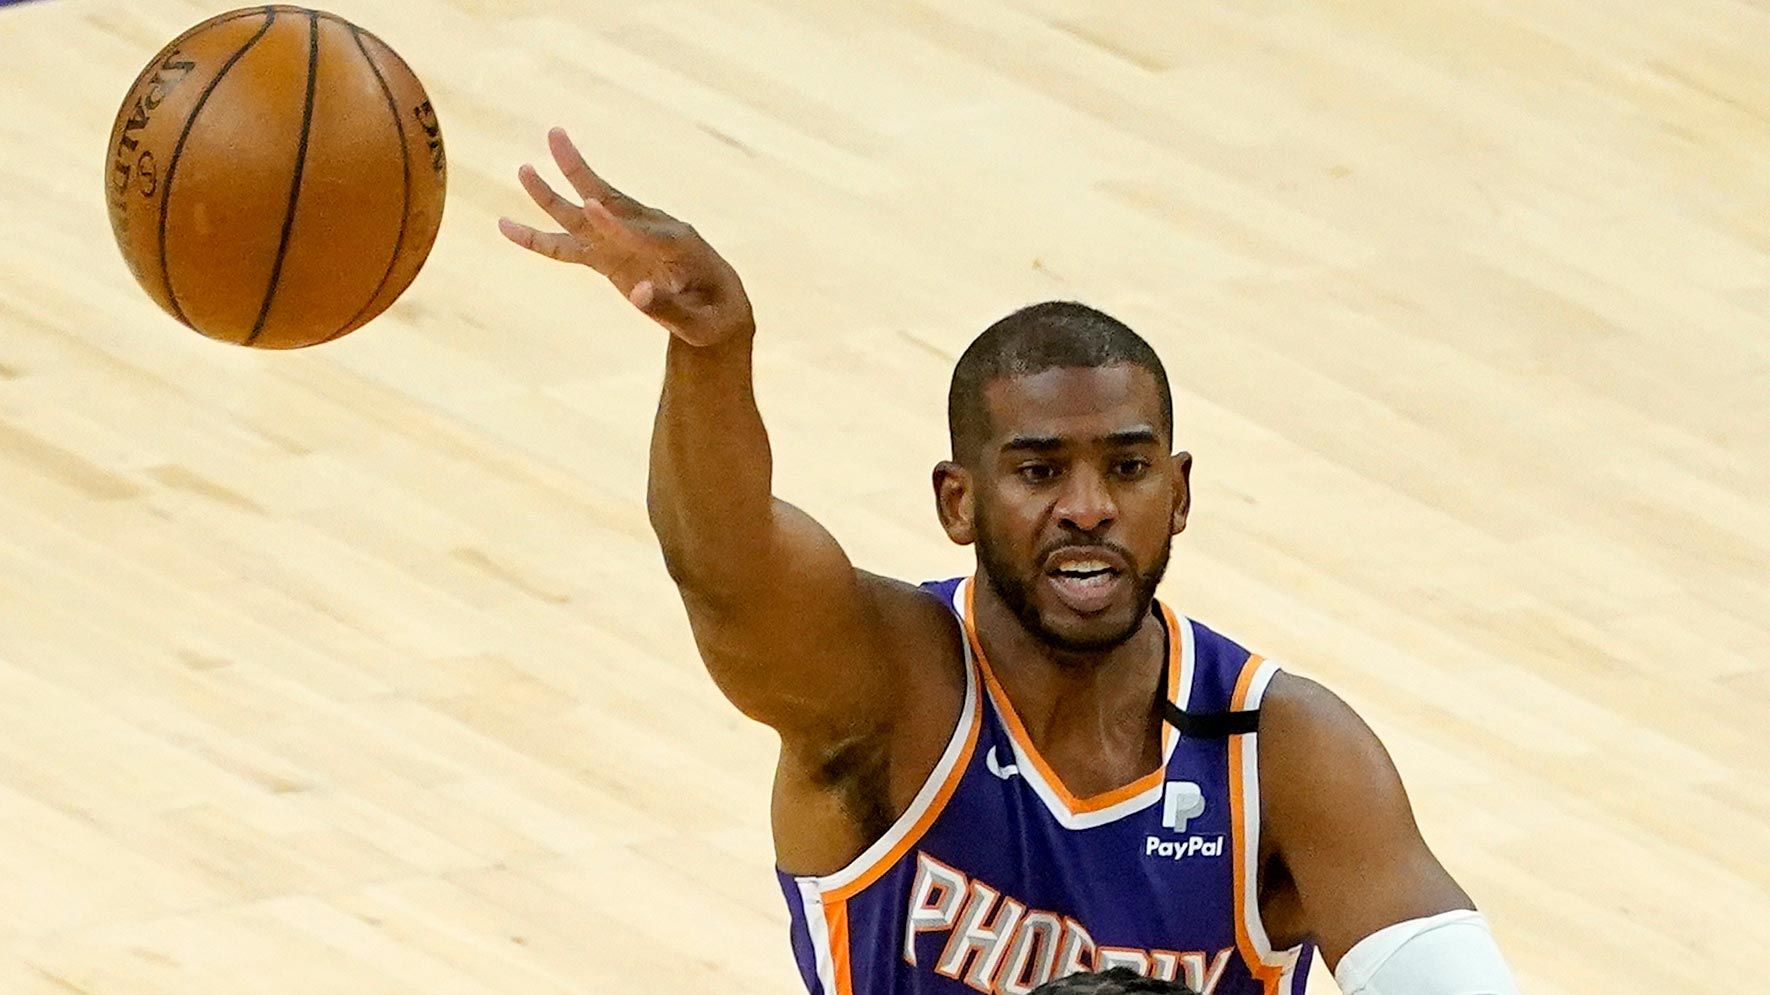 Chris Paul scores final seven points for Suns in win over Knicks